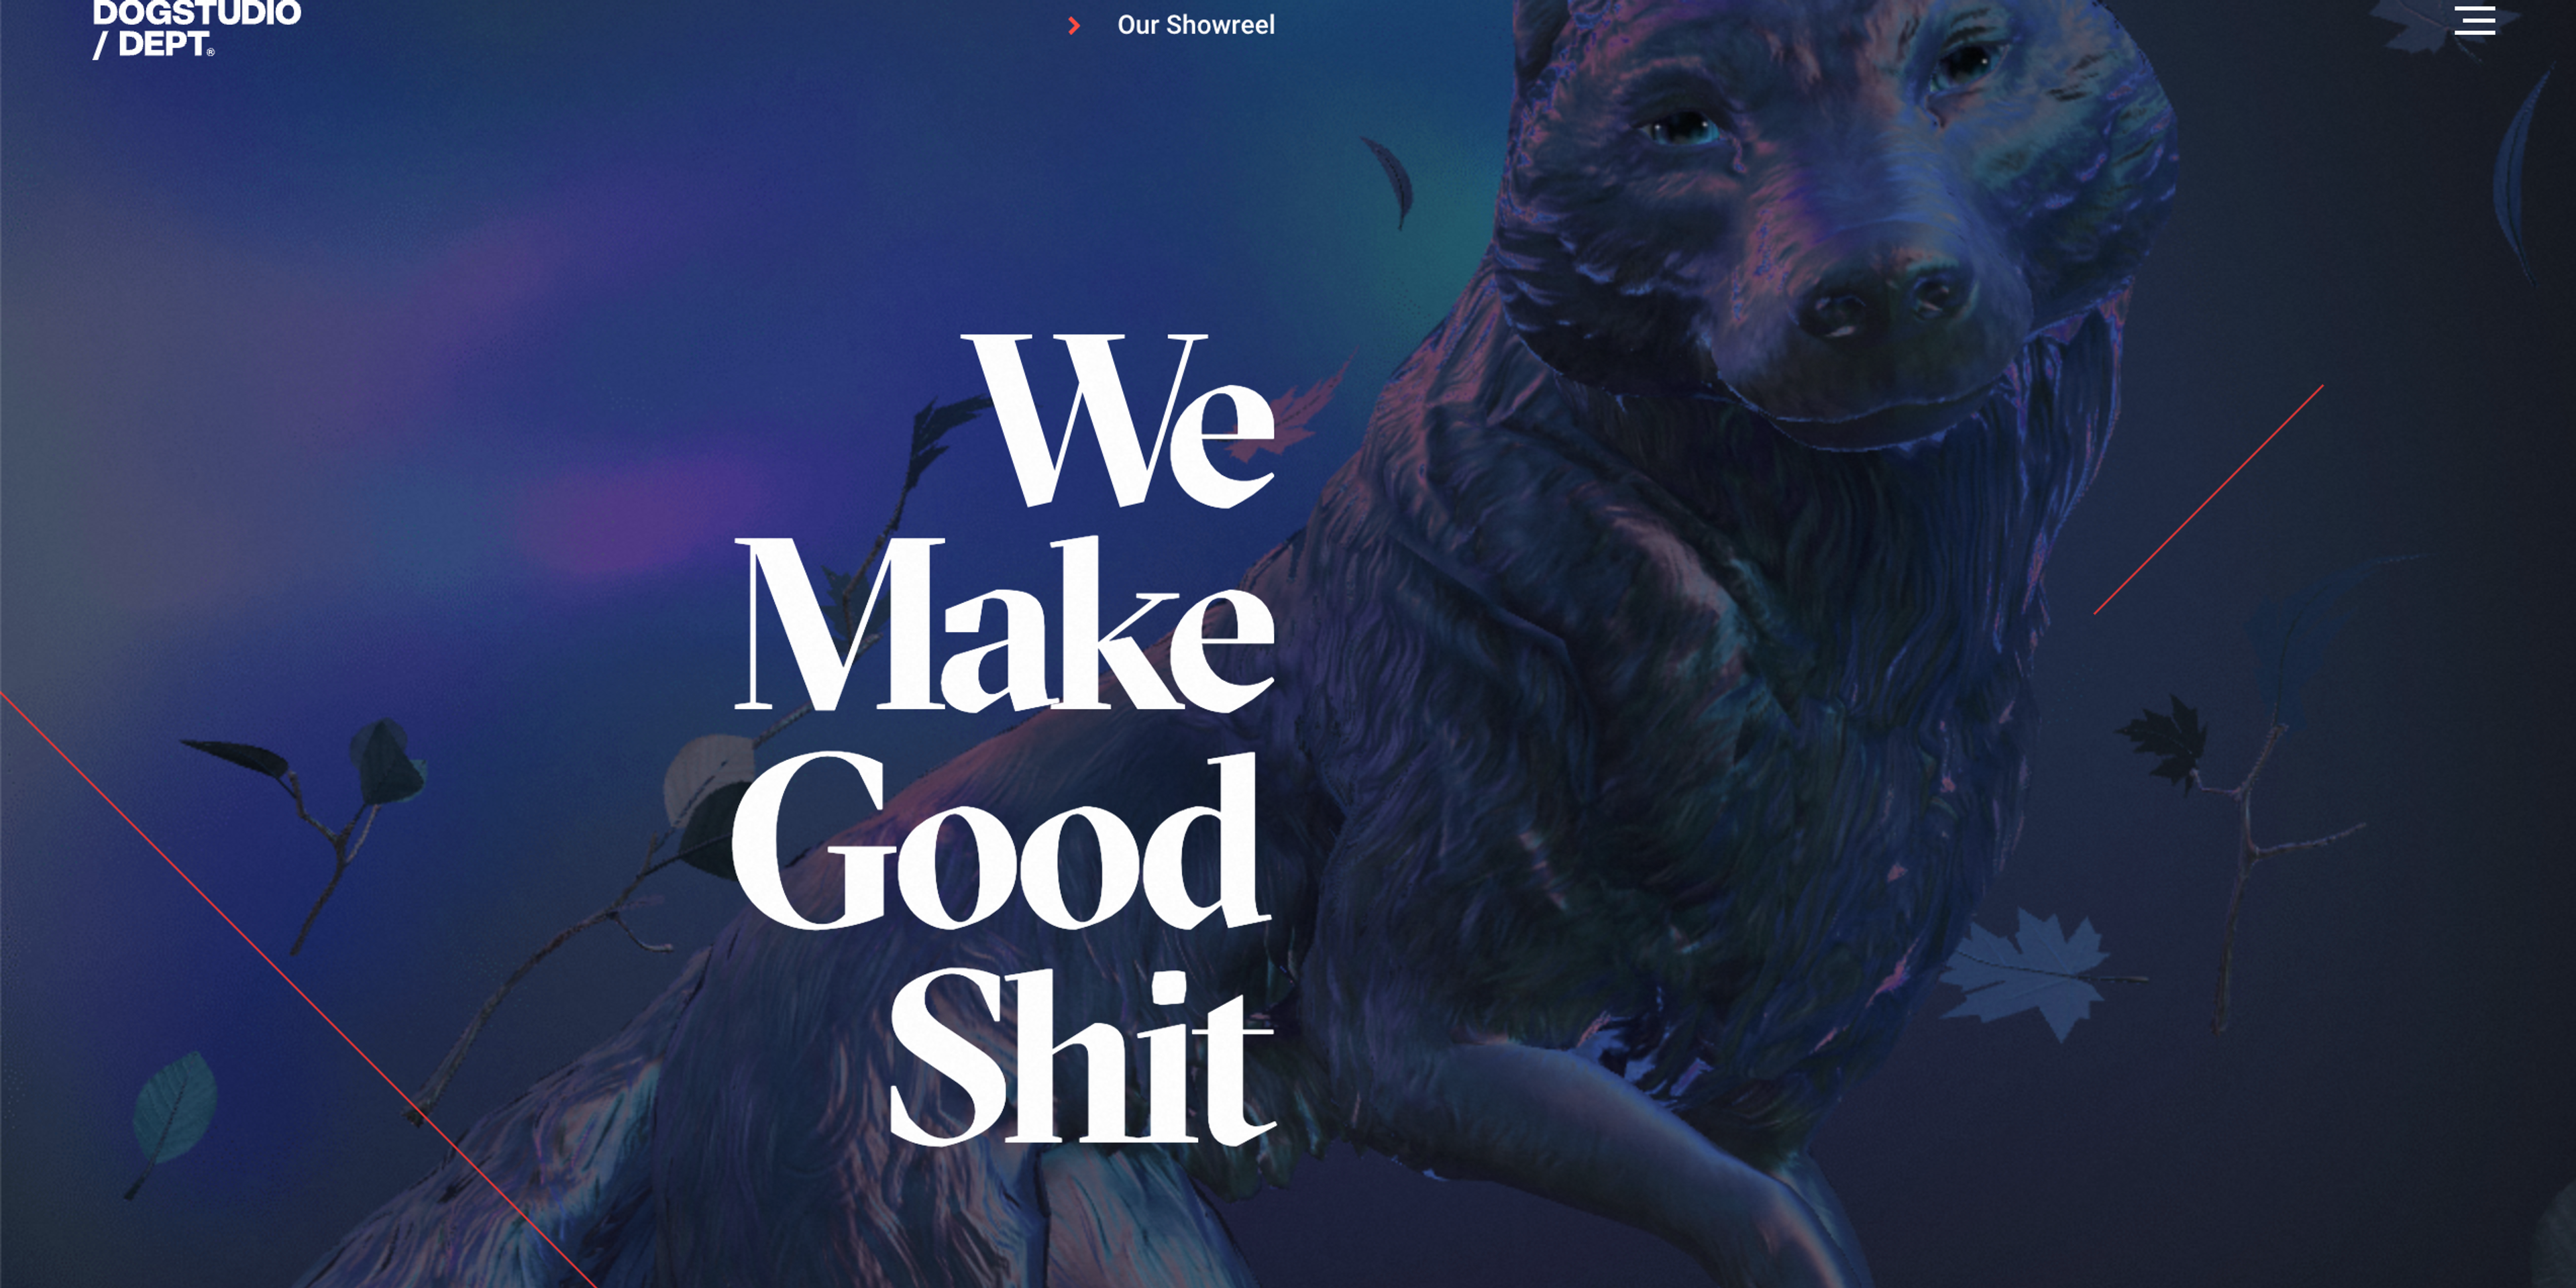 a website for a company called dogstudio / dept